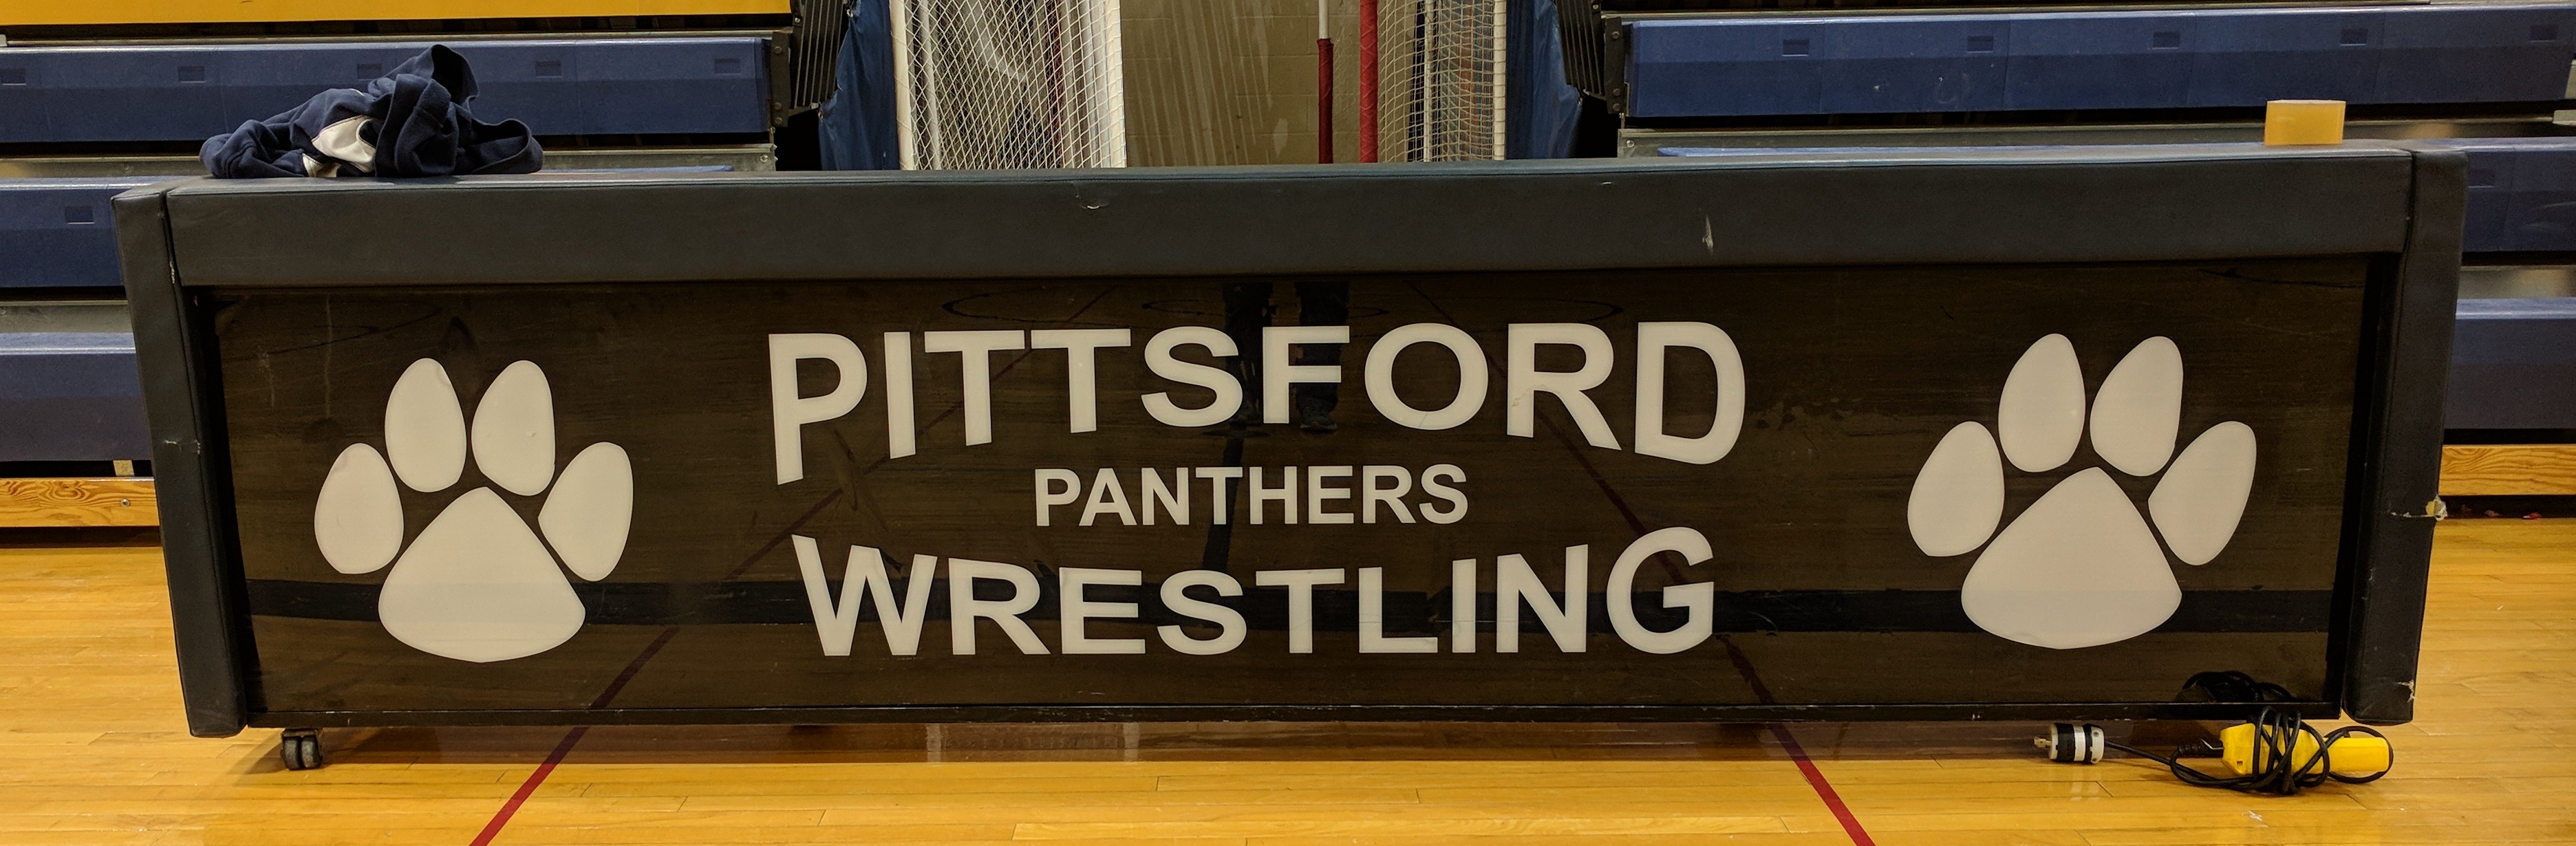 Pittsford Panthers Wrestling